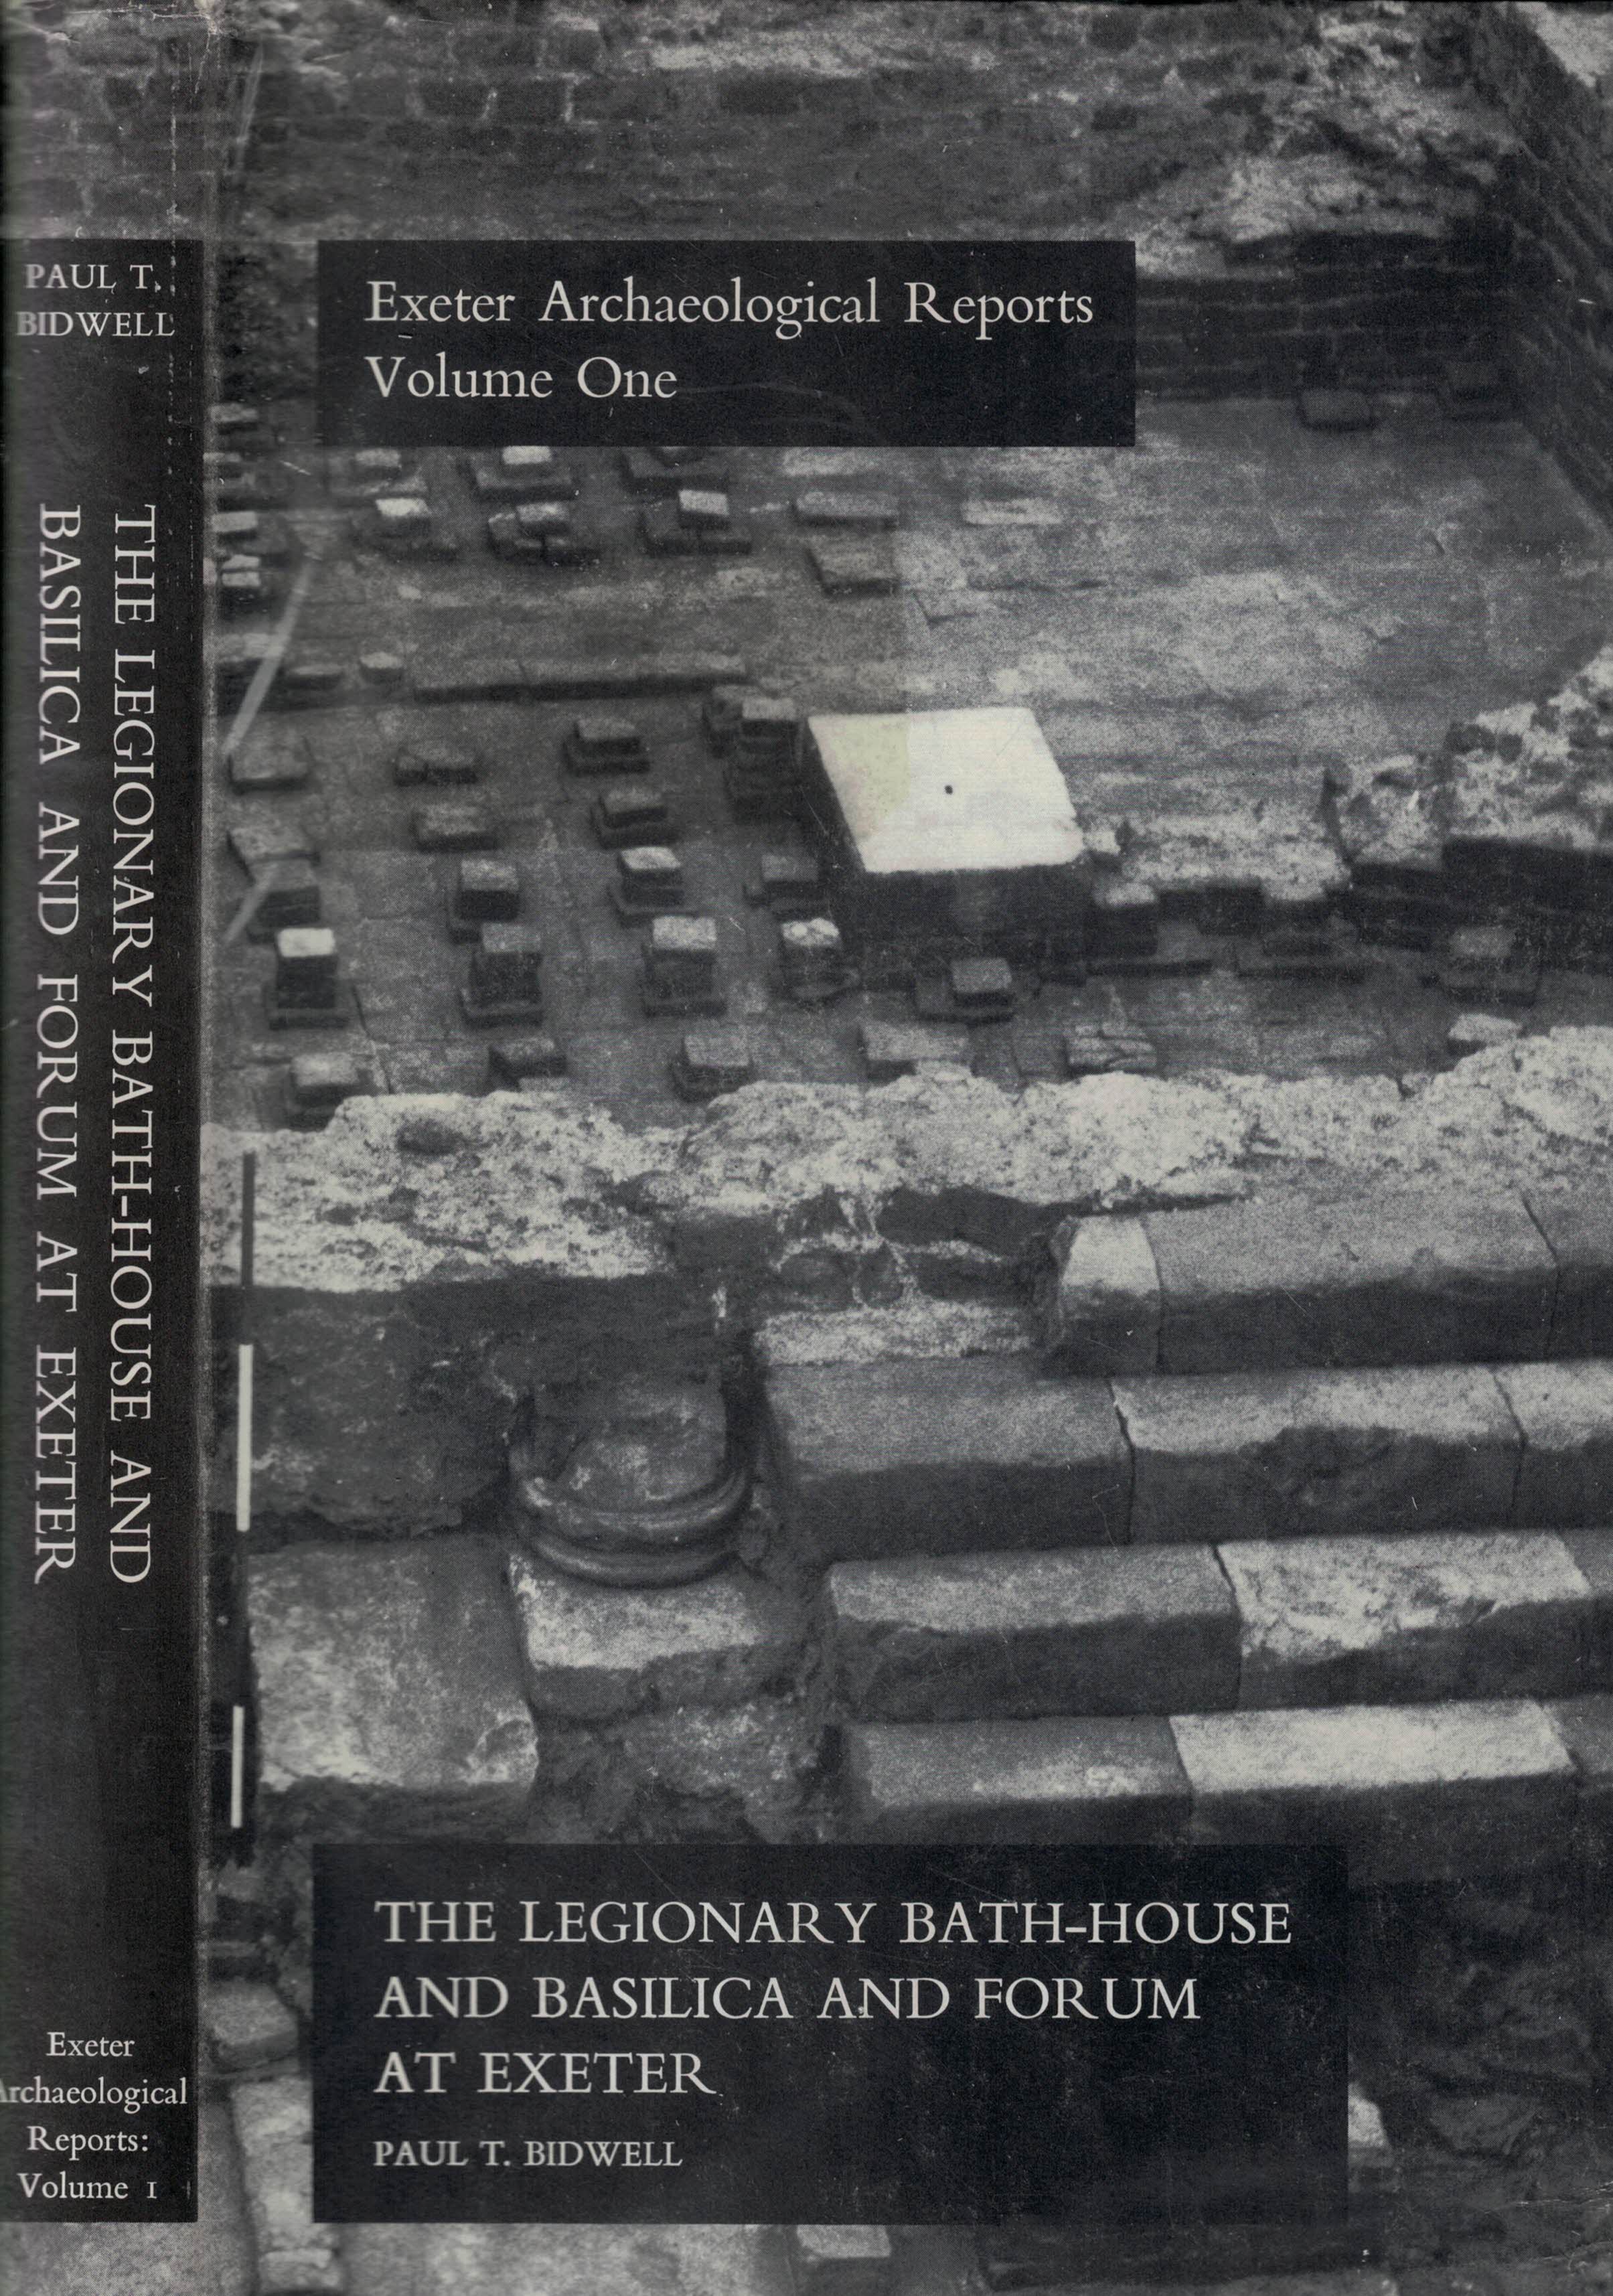 The Legionary Bath-House and Basilica and Forum at Exeter, With a Summary Account of the Legionary Forces. Exeter Archaeological Reports: Volume 1.